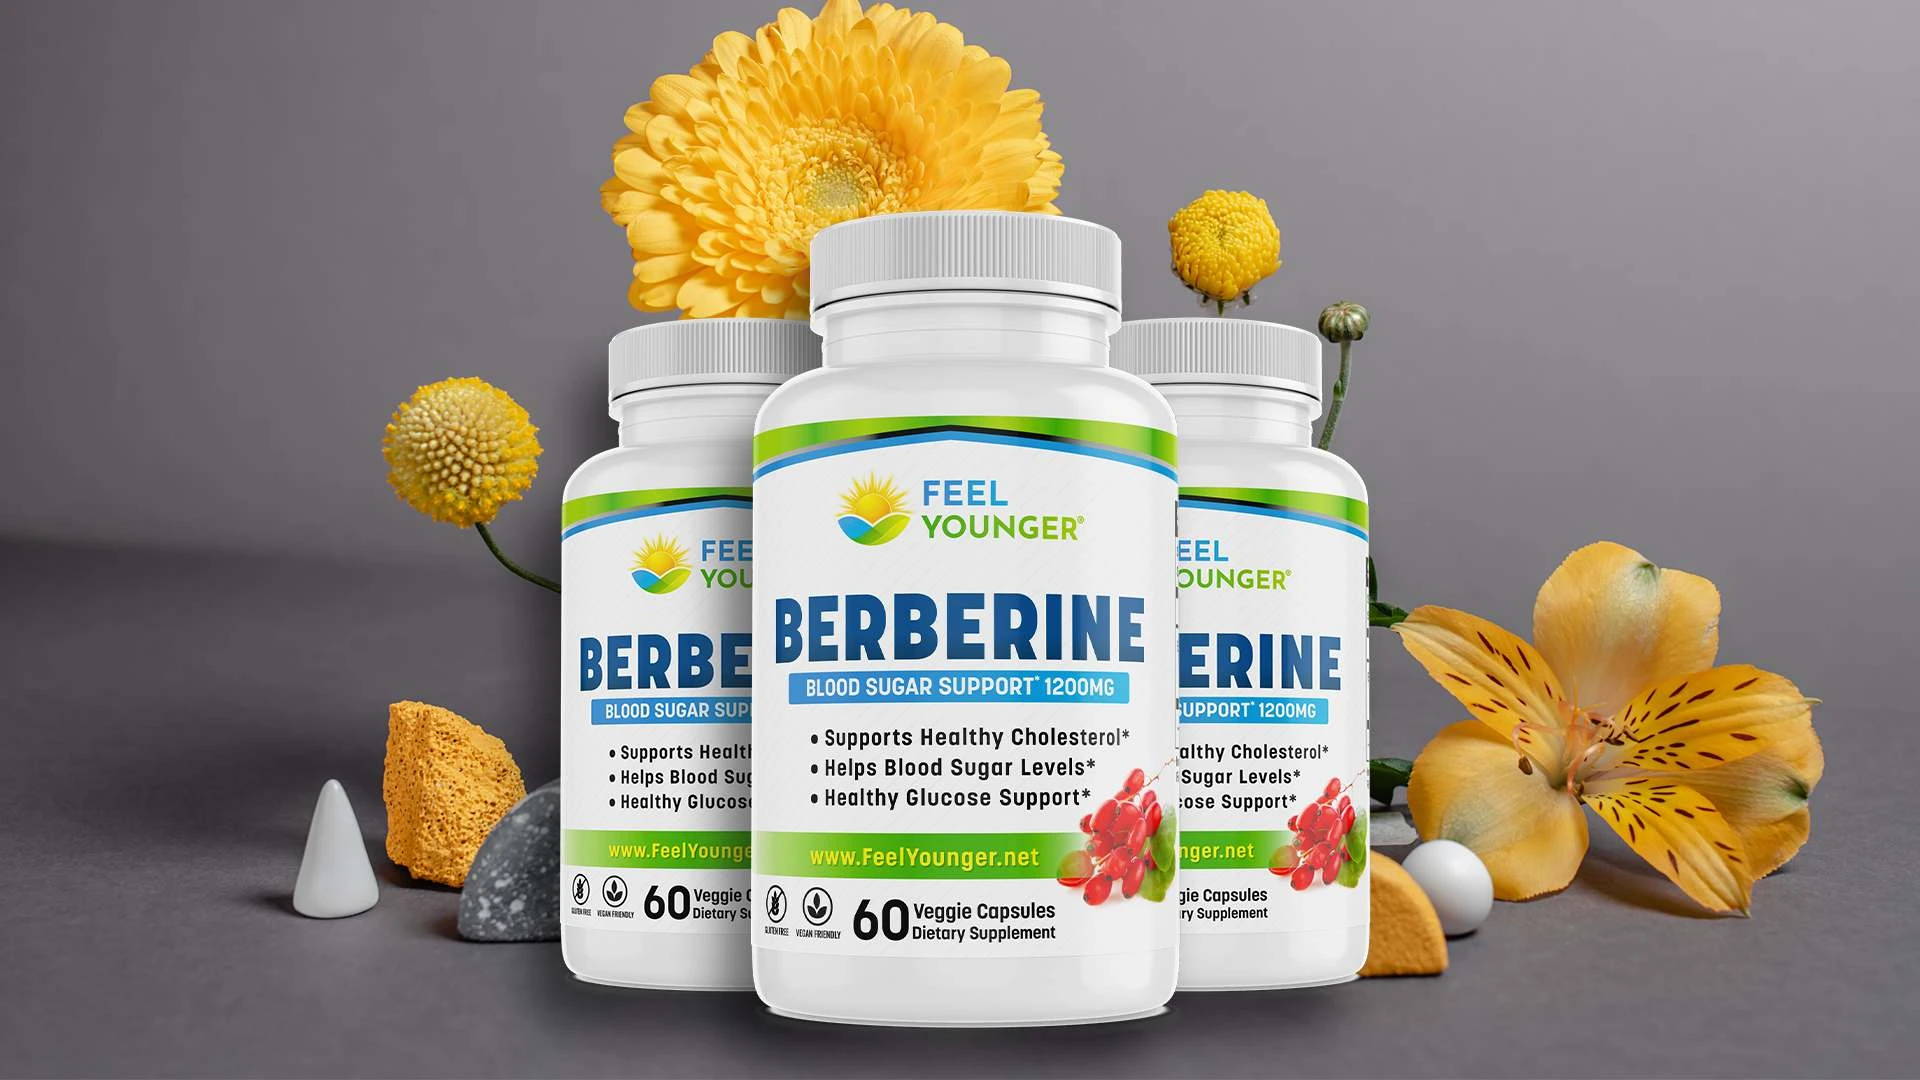 Berberine blood sugar balance supplement by Feel Younger